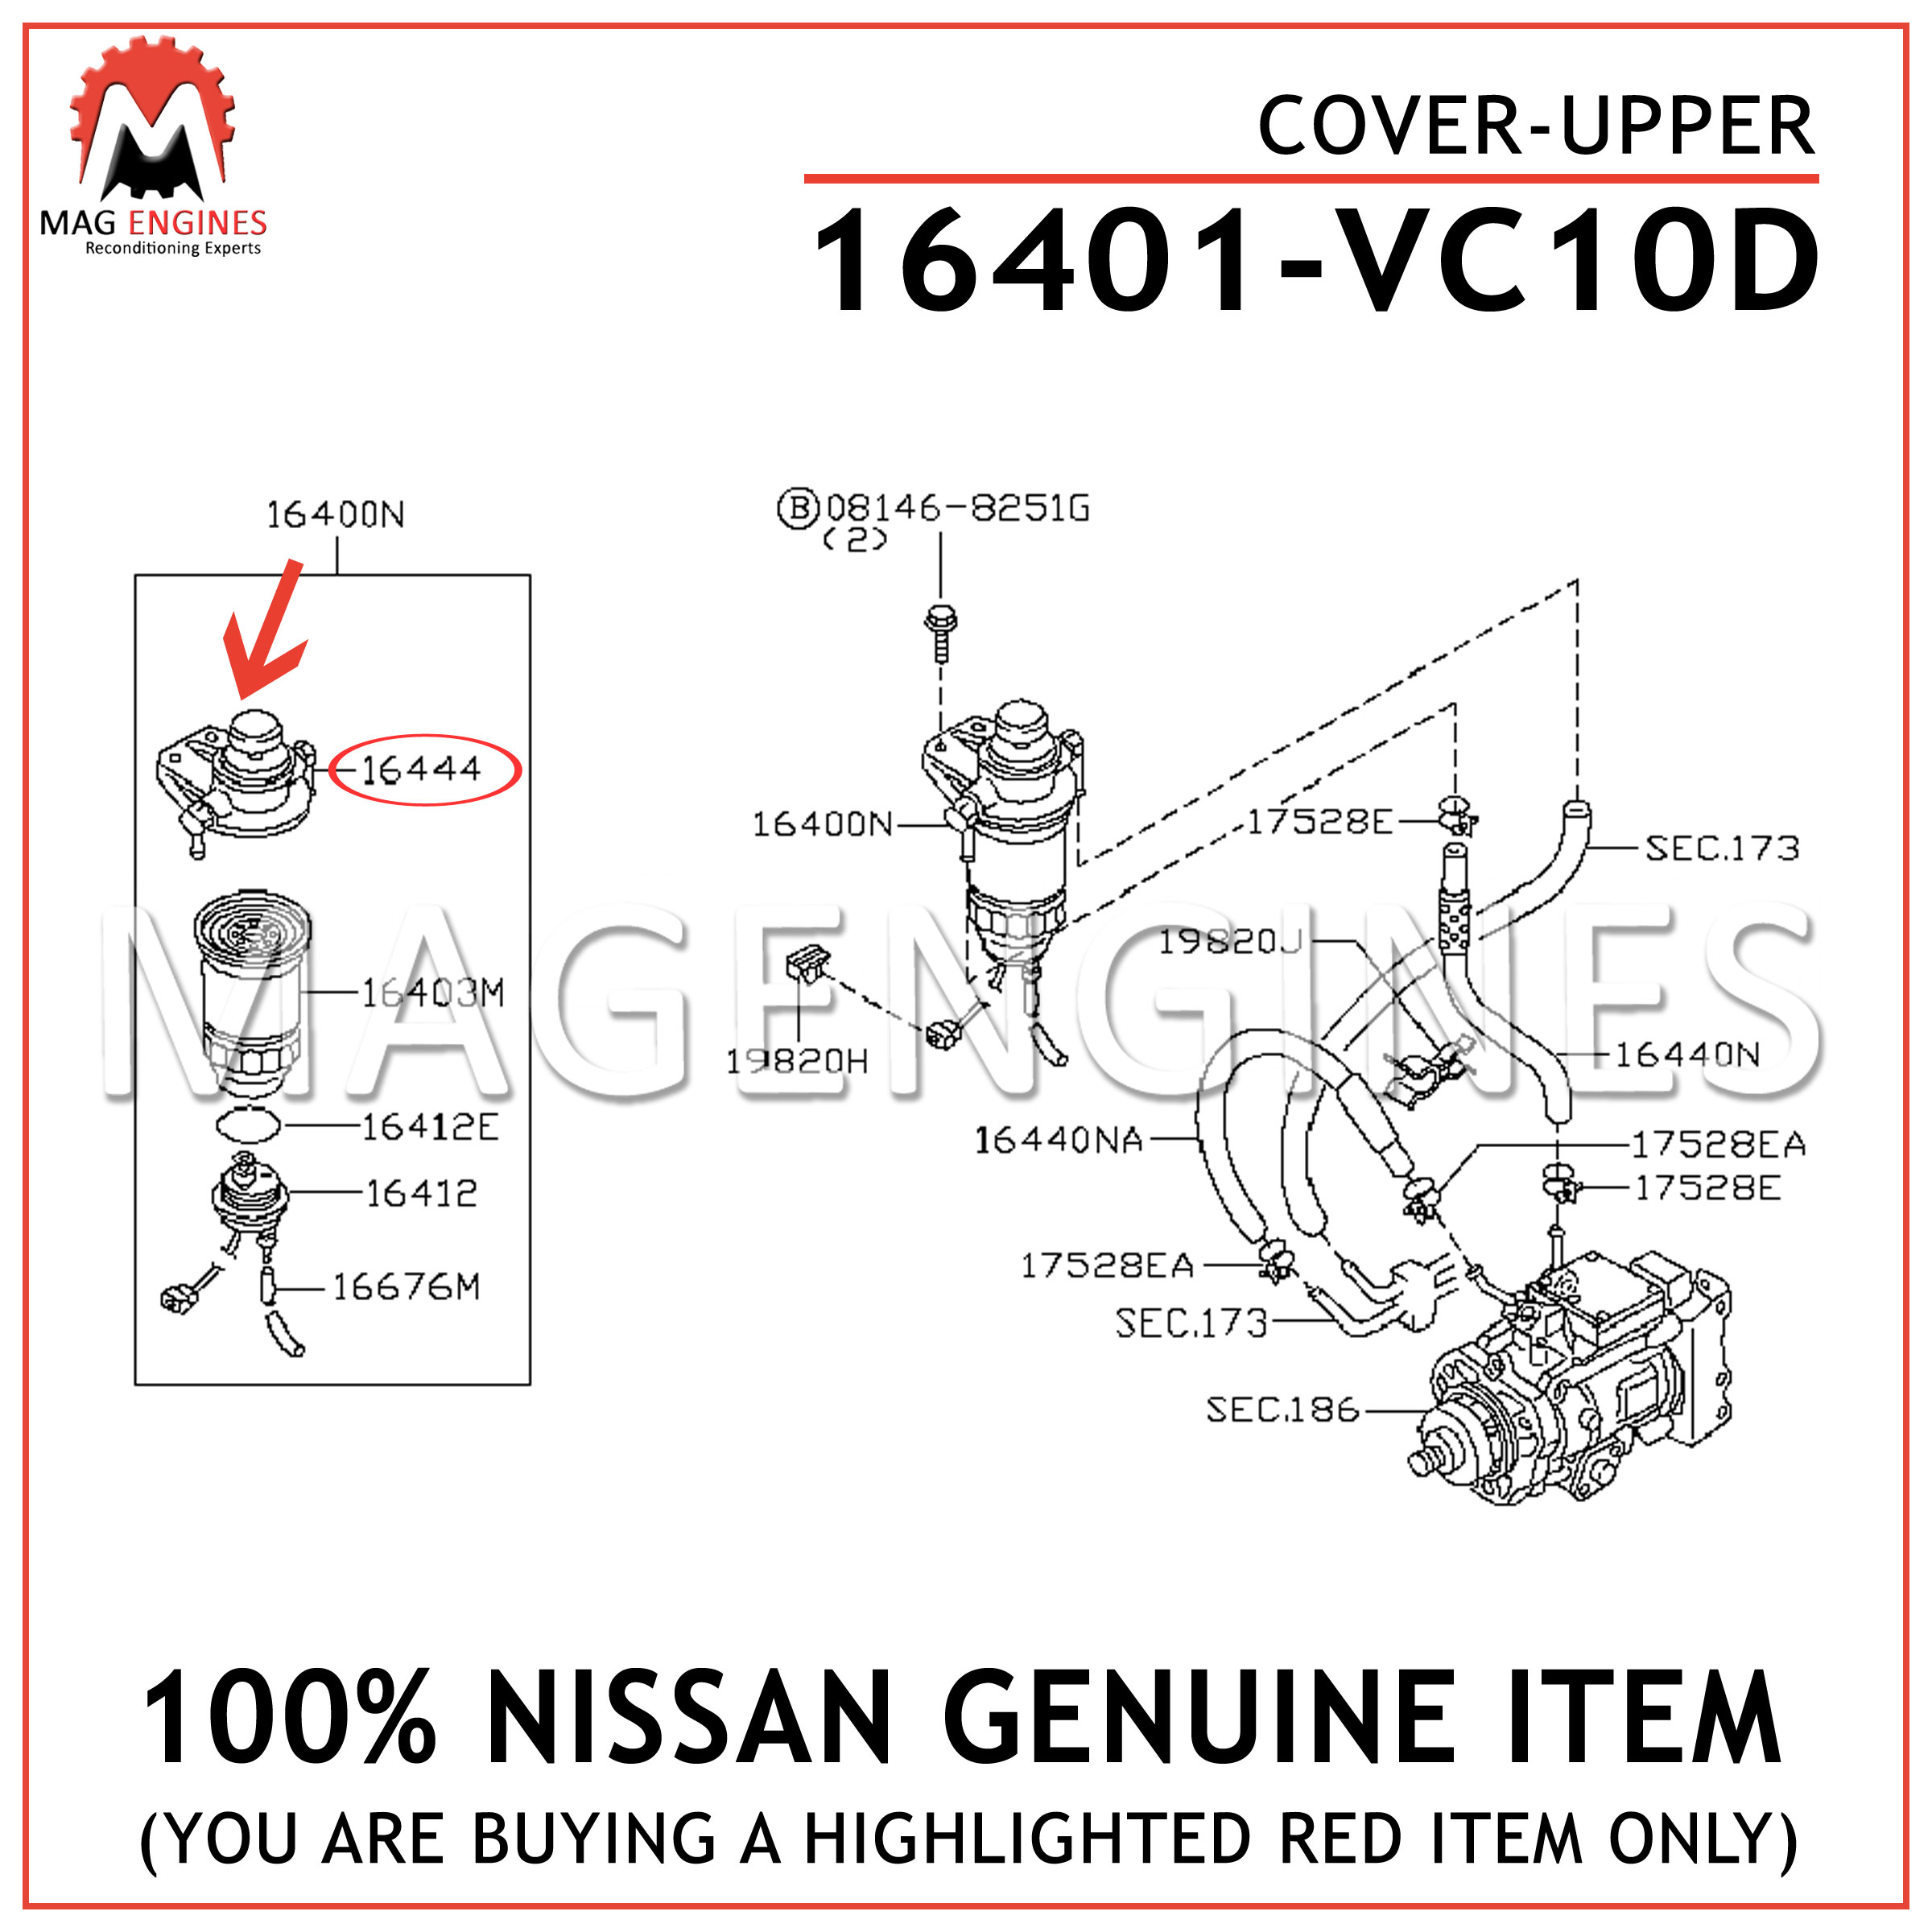 16401-VC10D NISSAN GENUINE COVER-UPPER 16401VC10D – Mag Engines